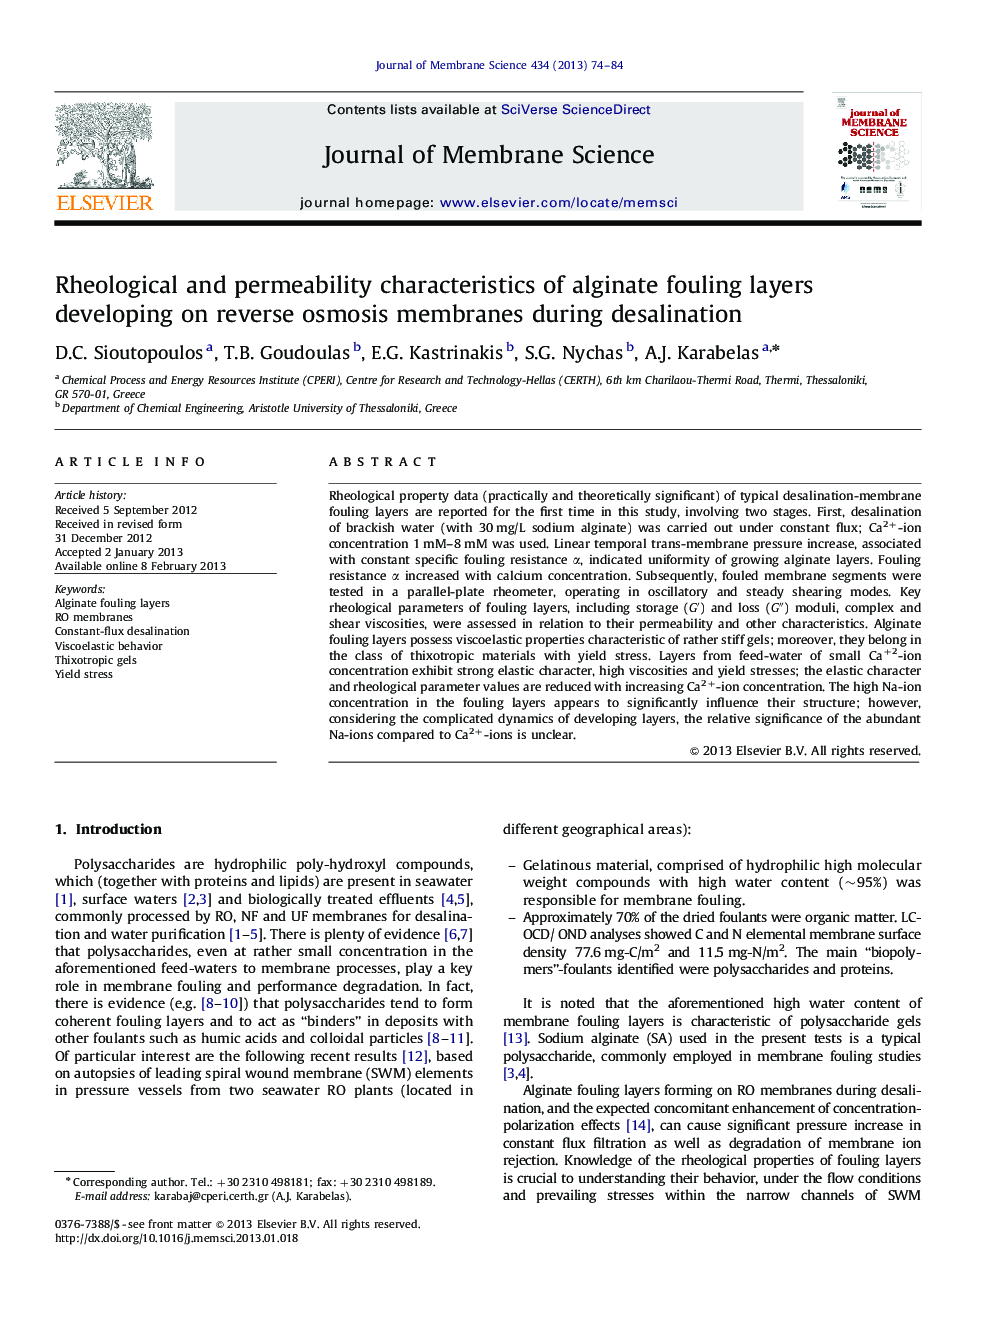 Rheological and permeability characteristics of alginate fouling layers developing on reverse osmosis membranes during desalination